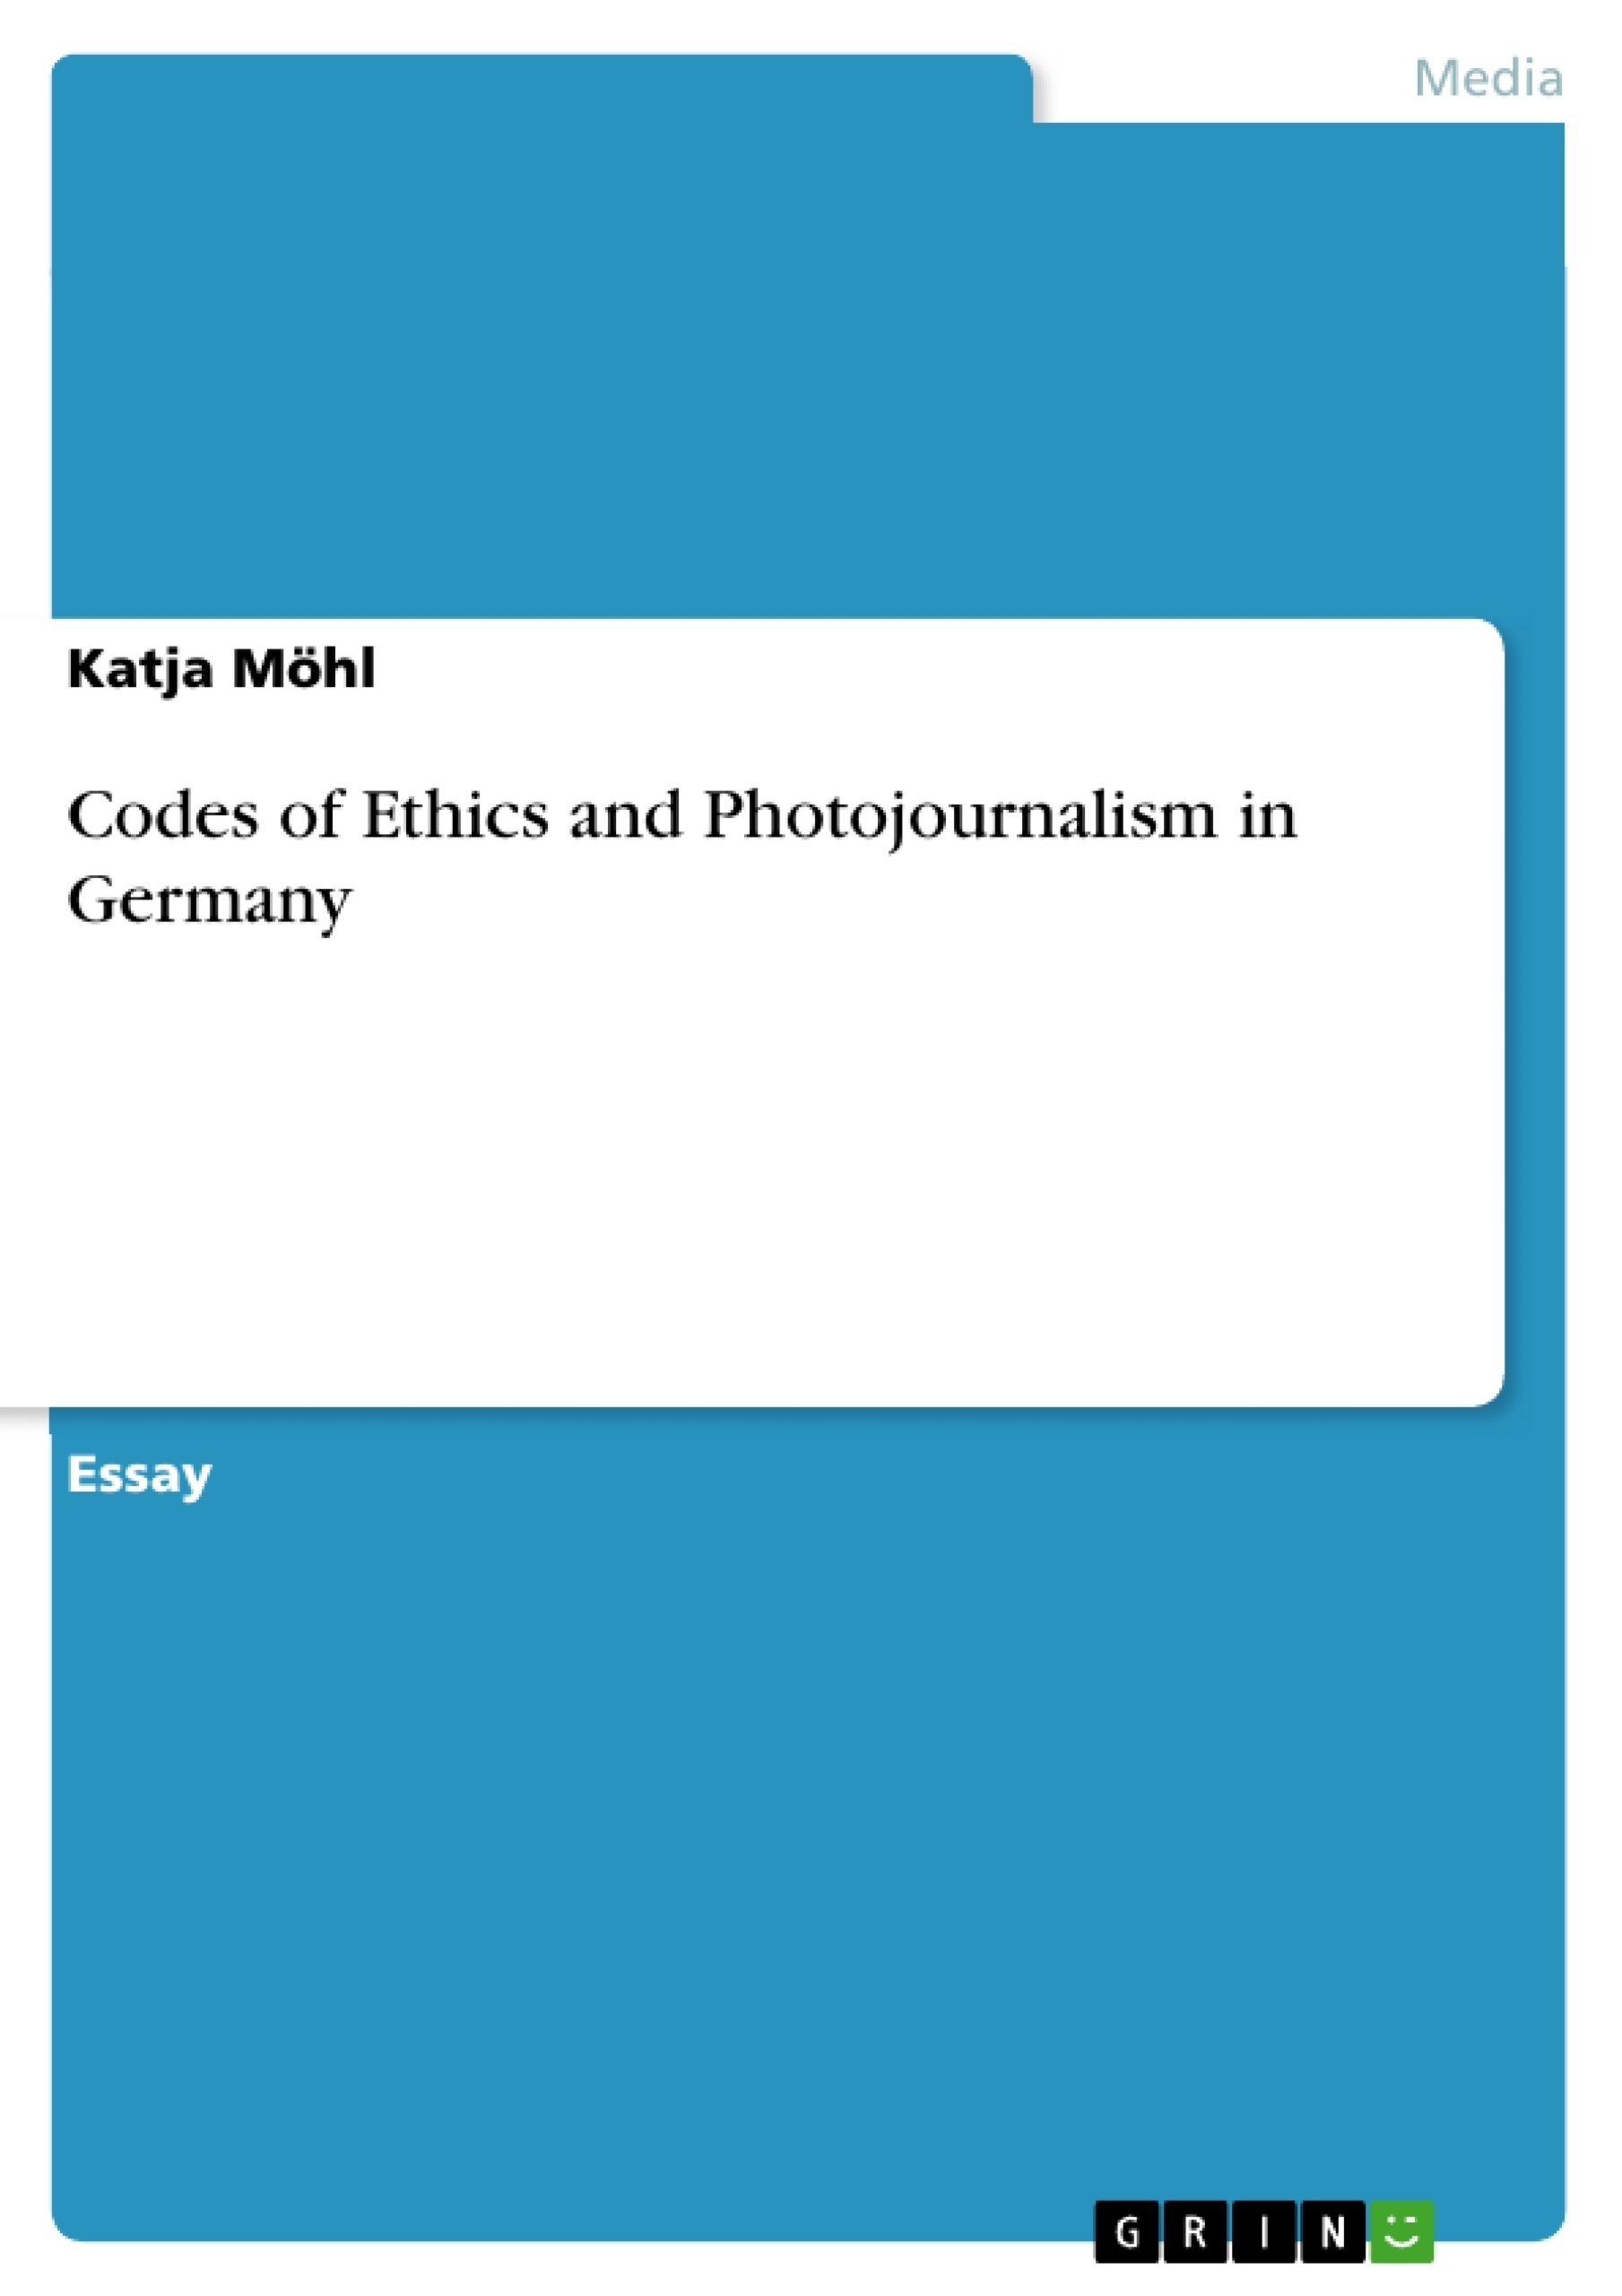 Titel: Codes of Ethics and Photojournalism in Germany